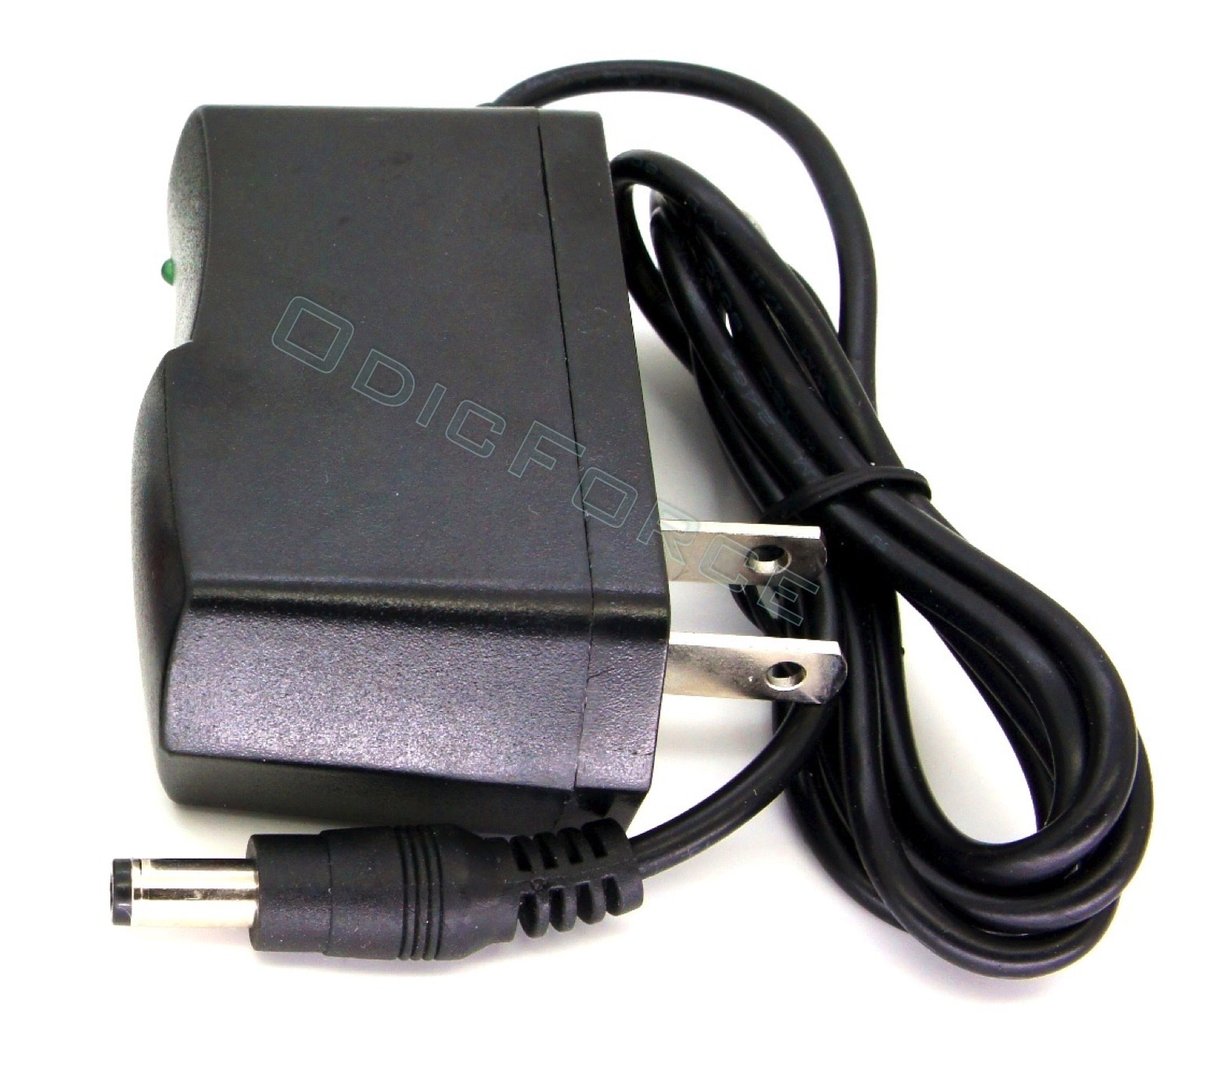 DC 5V/9V 1A To AC 100-240V Wall Charger Power Supply Adapter 5.5x2.5MM US Plug 